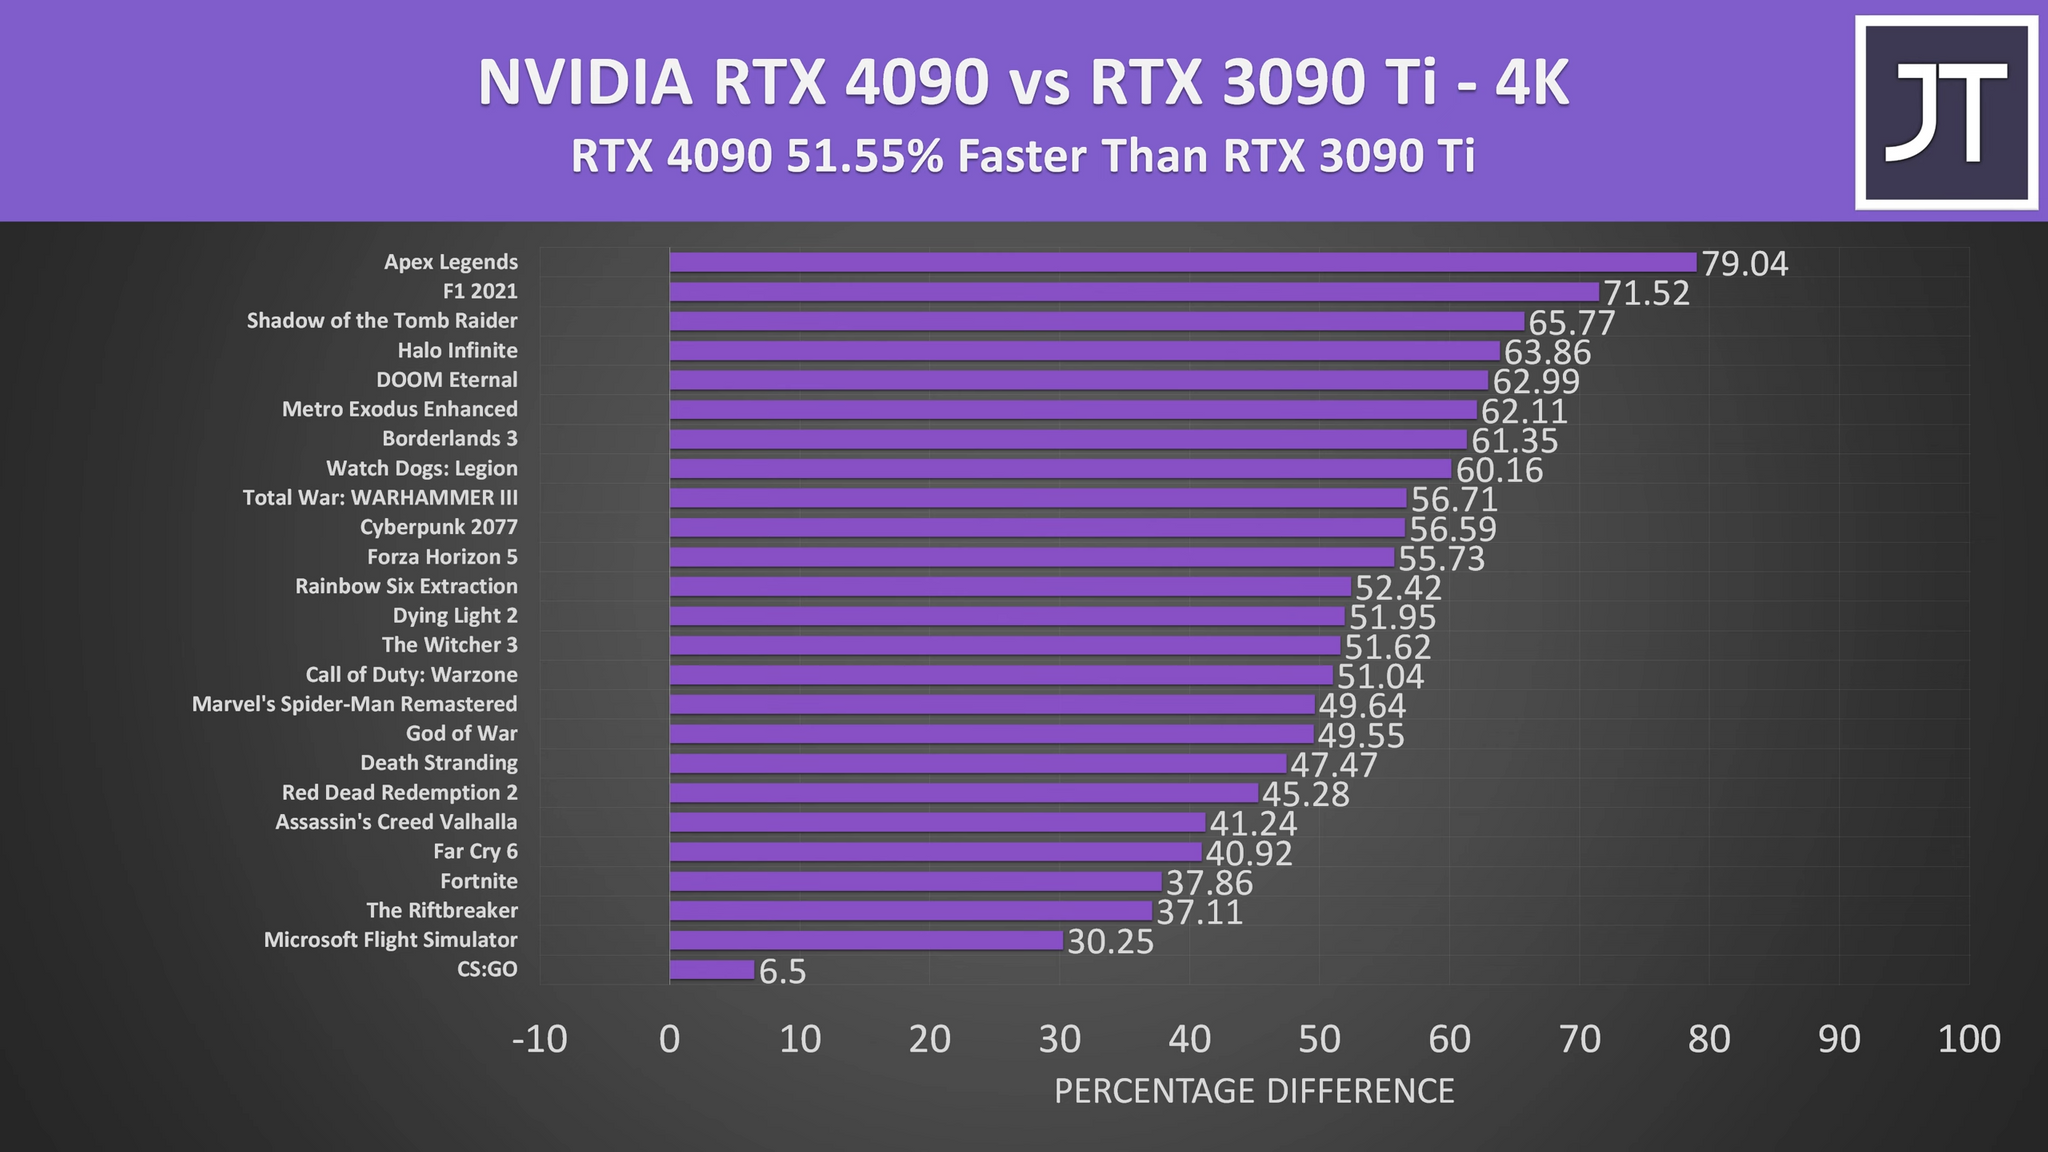 Experience the power of RTX 2090 for yourself